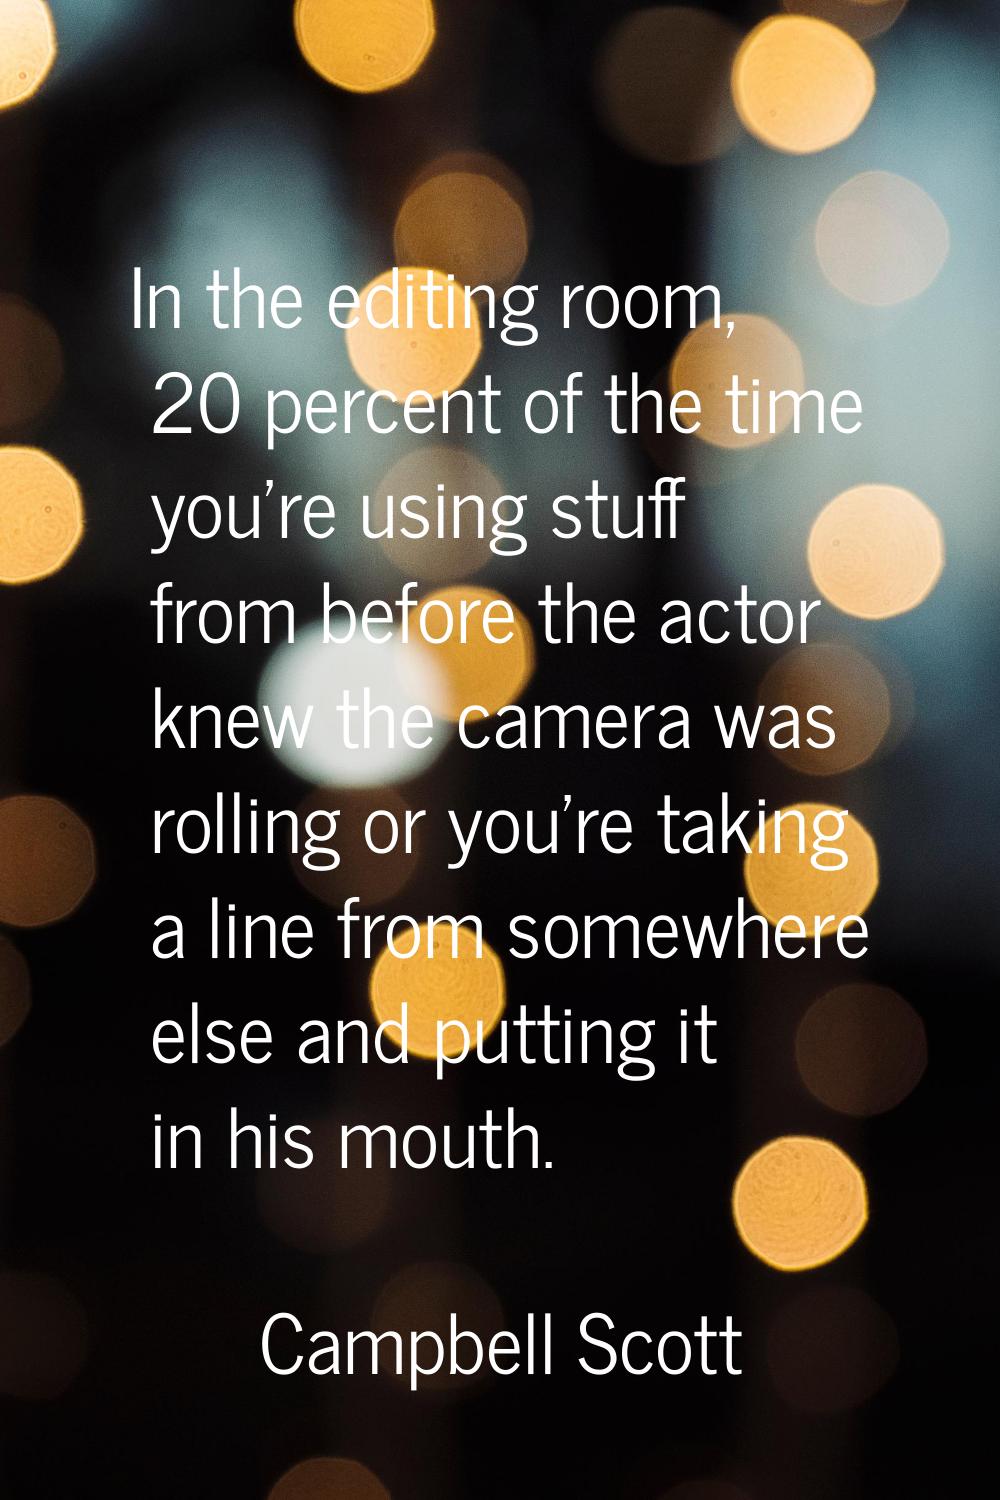 In the editing room, 20 percent of the time you're using stuff from before the actor knew the camer